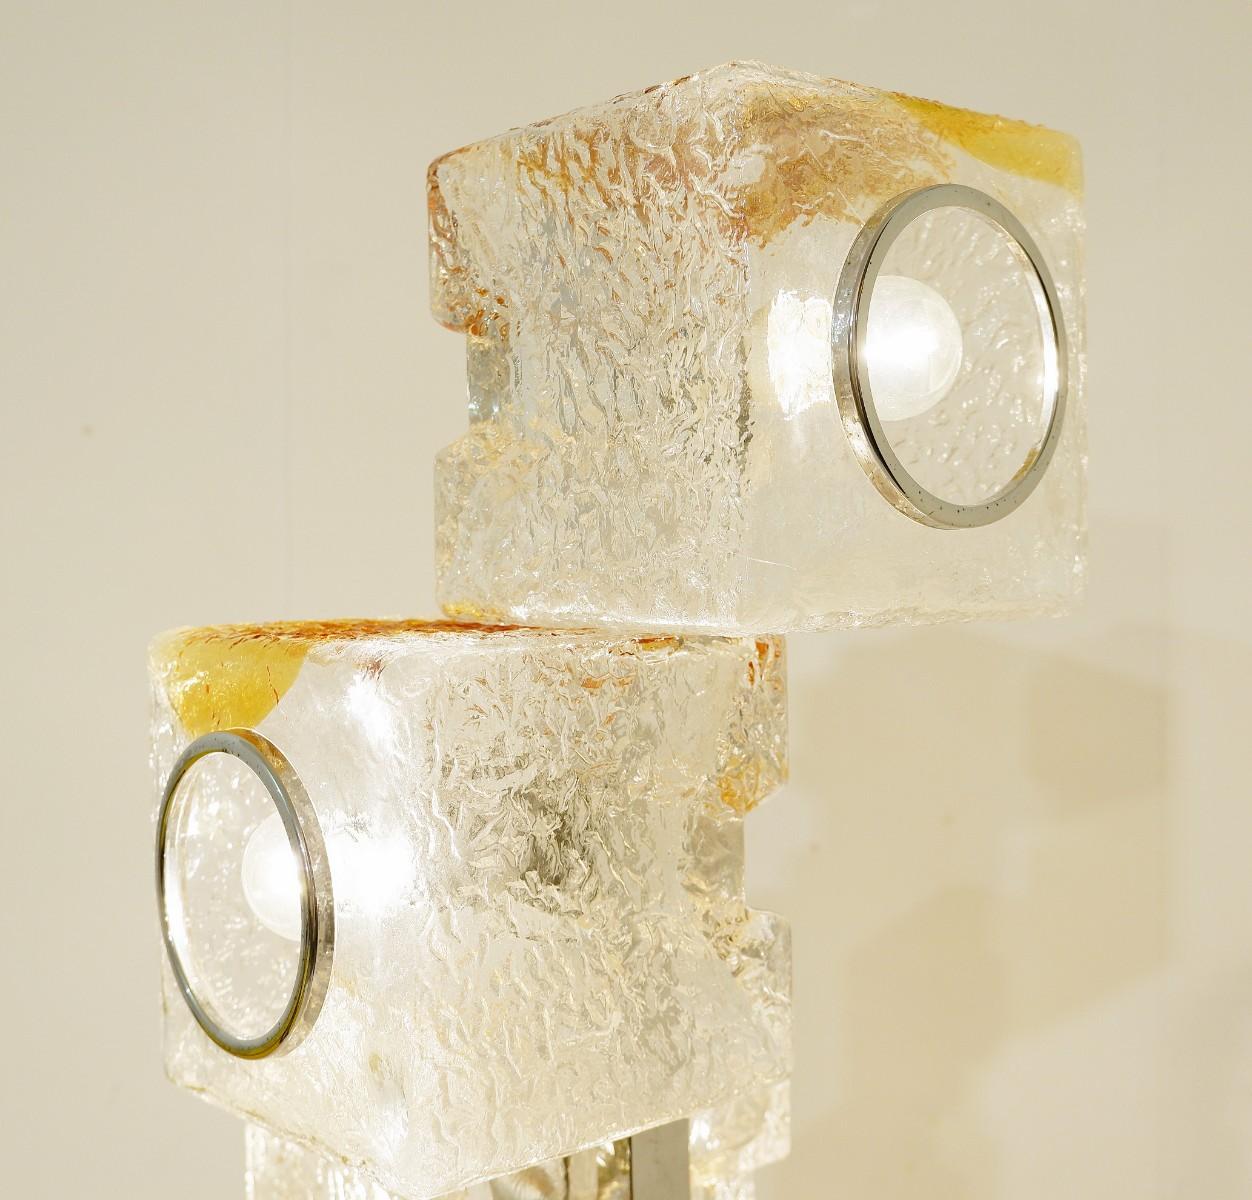 Toni Zuccheri cubes floor lamps, VeArt, Murano Italy, 1970 - a pair available
price for one.